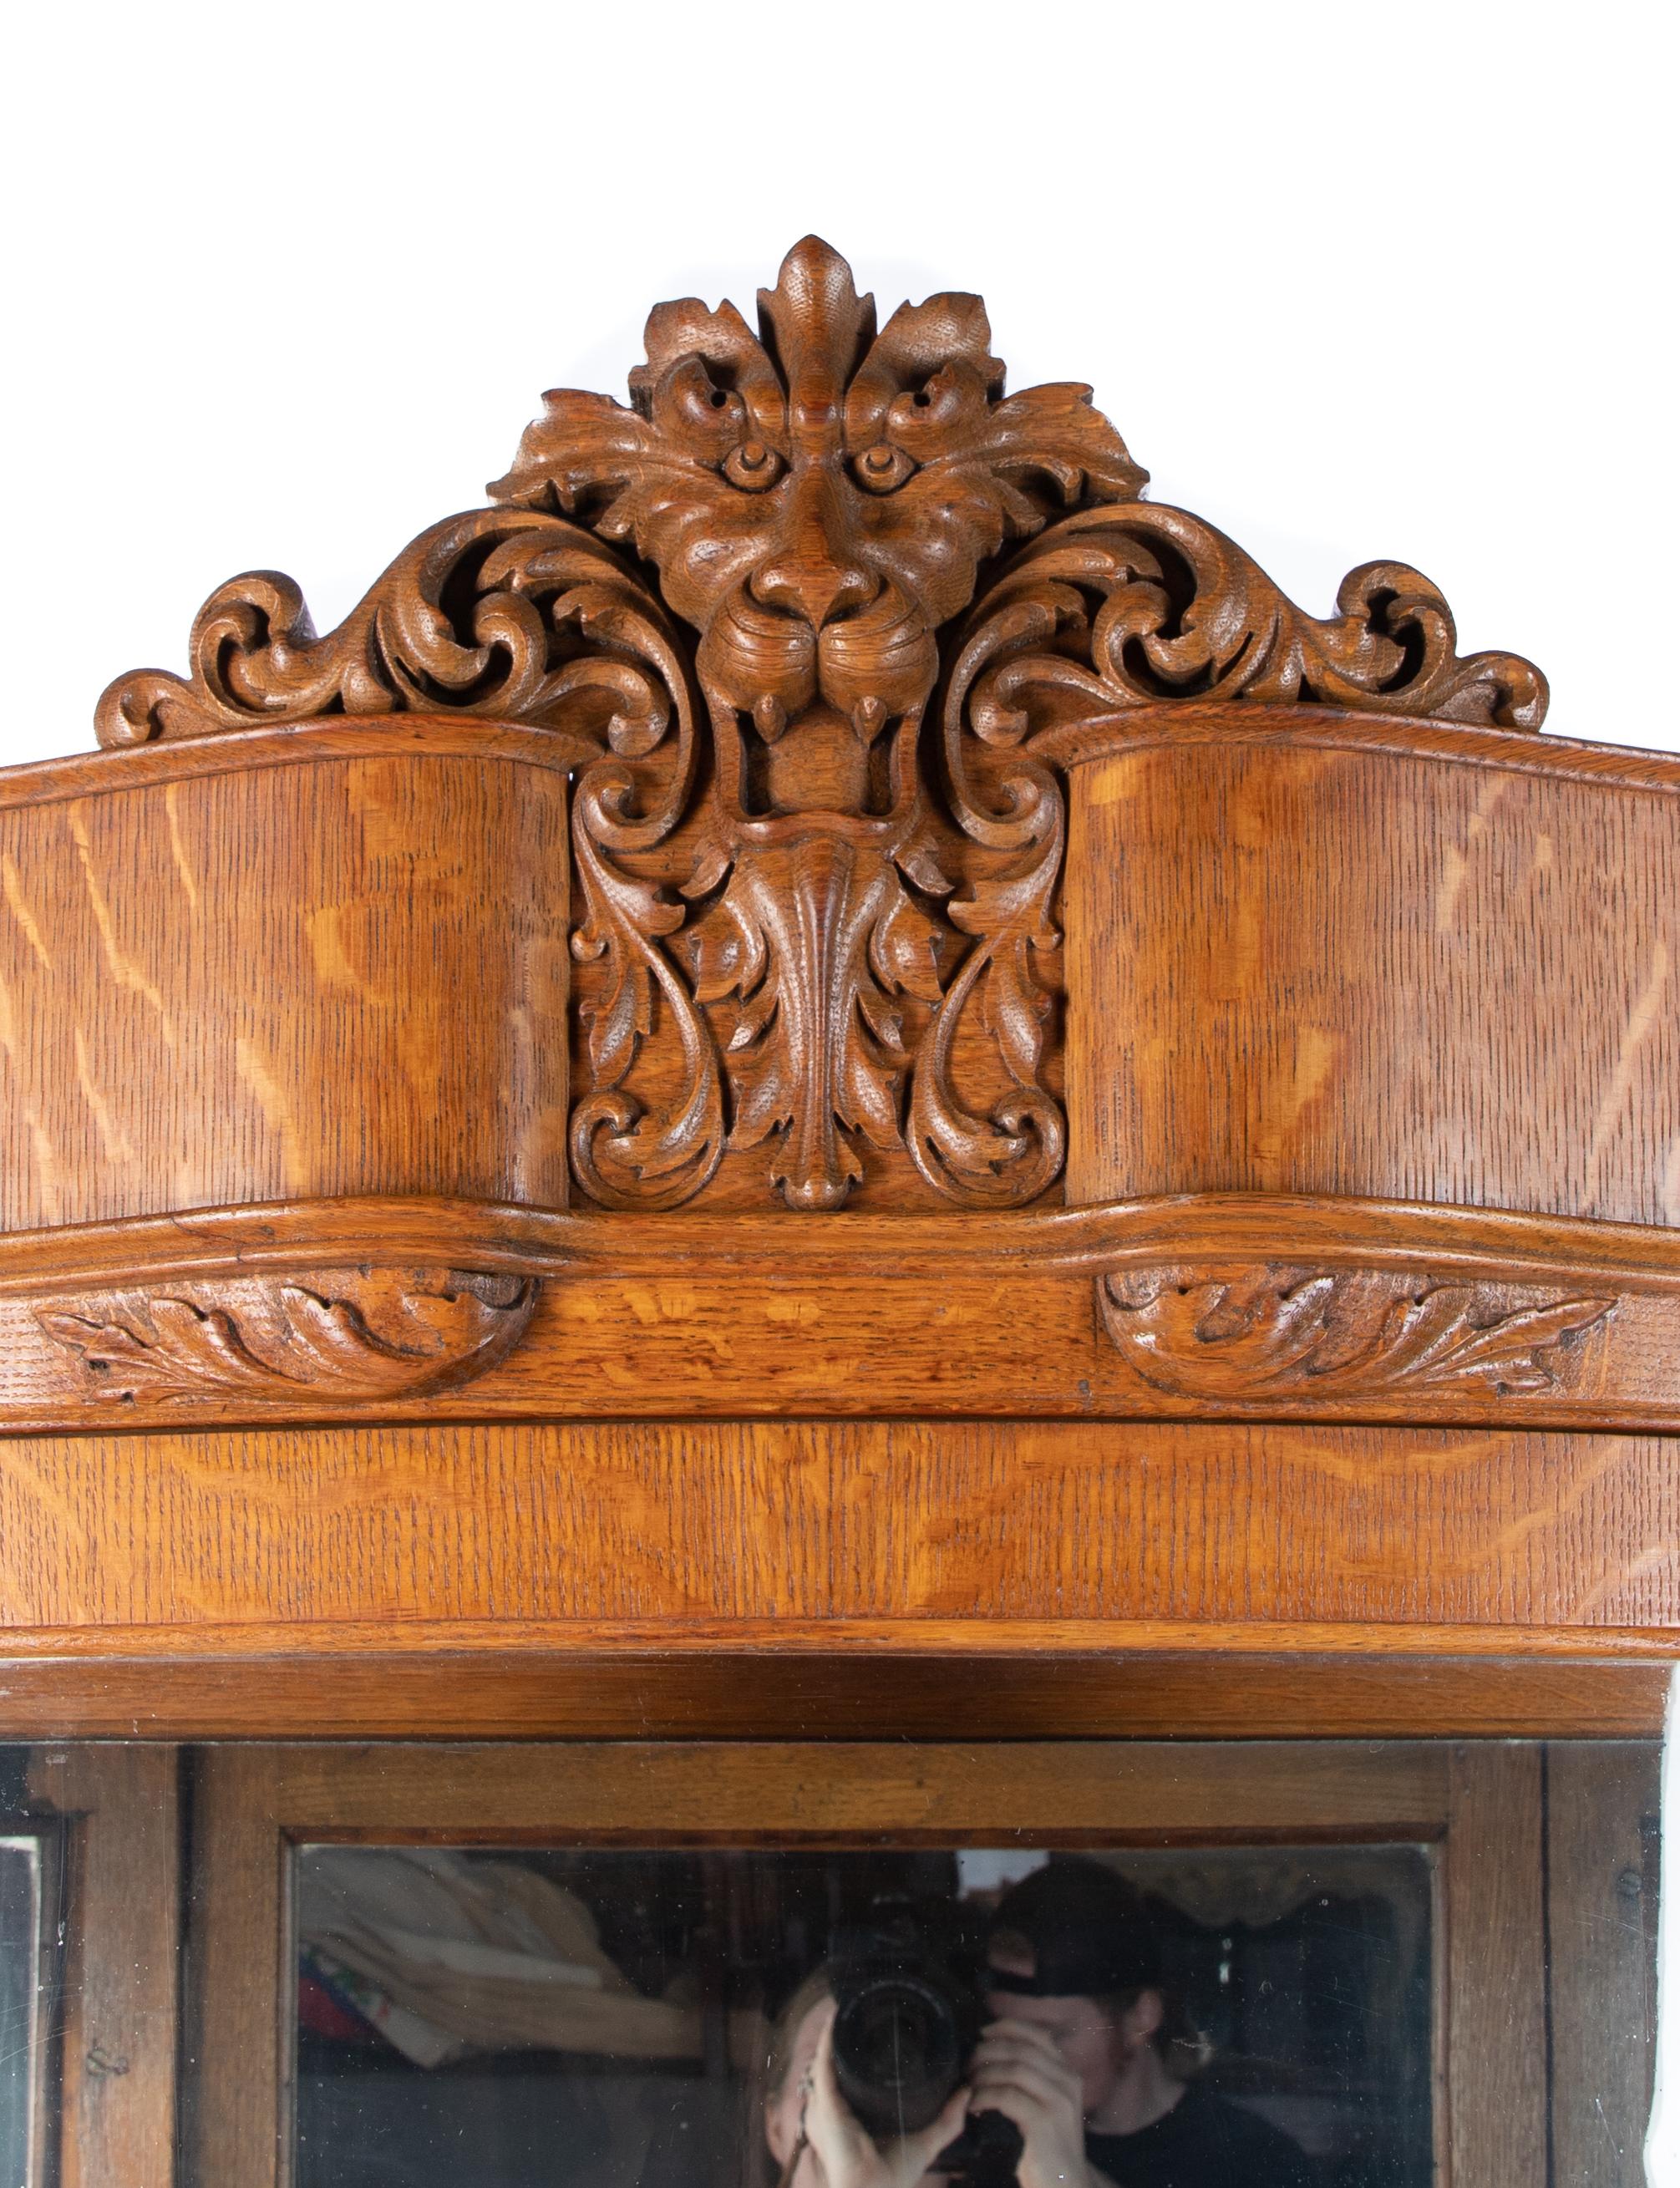 Offering this stunning tiger maple Horner cabinet. Sitting atop 4 paw feet on casters it rises upward. On the front of the curved body two columns rise to the top. On top of the columns are tigers heads, and one tiger head in the center above the